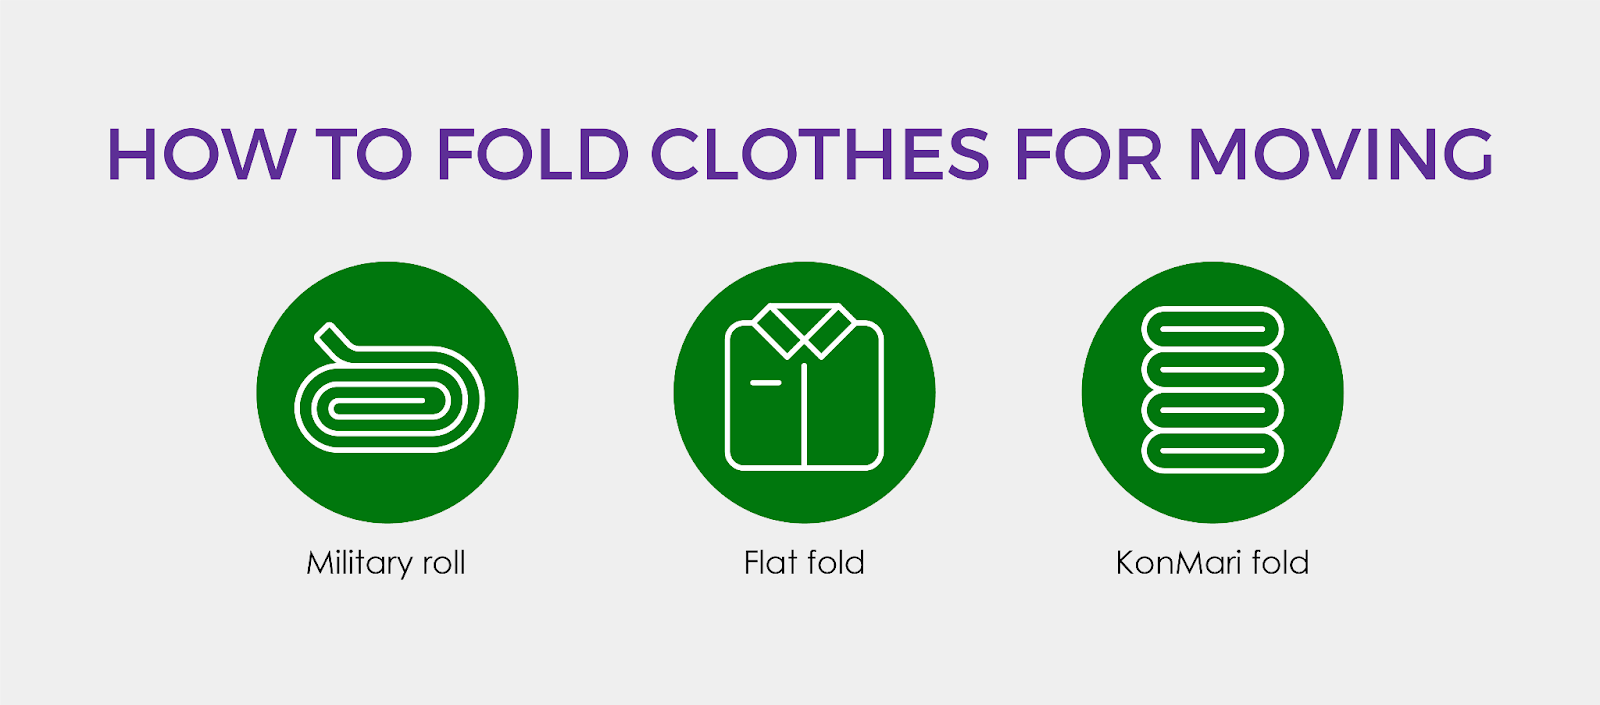 How to fold clothes for moving